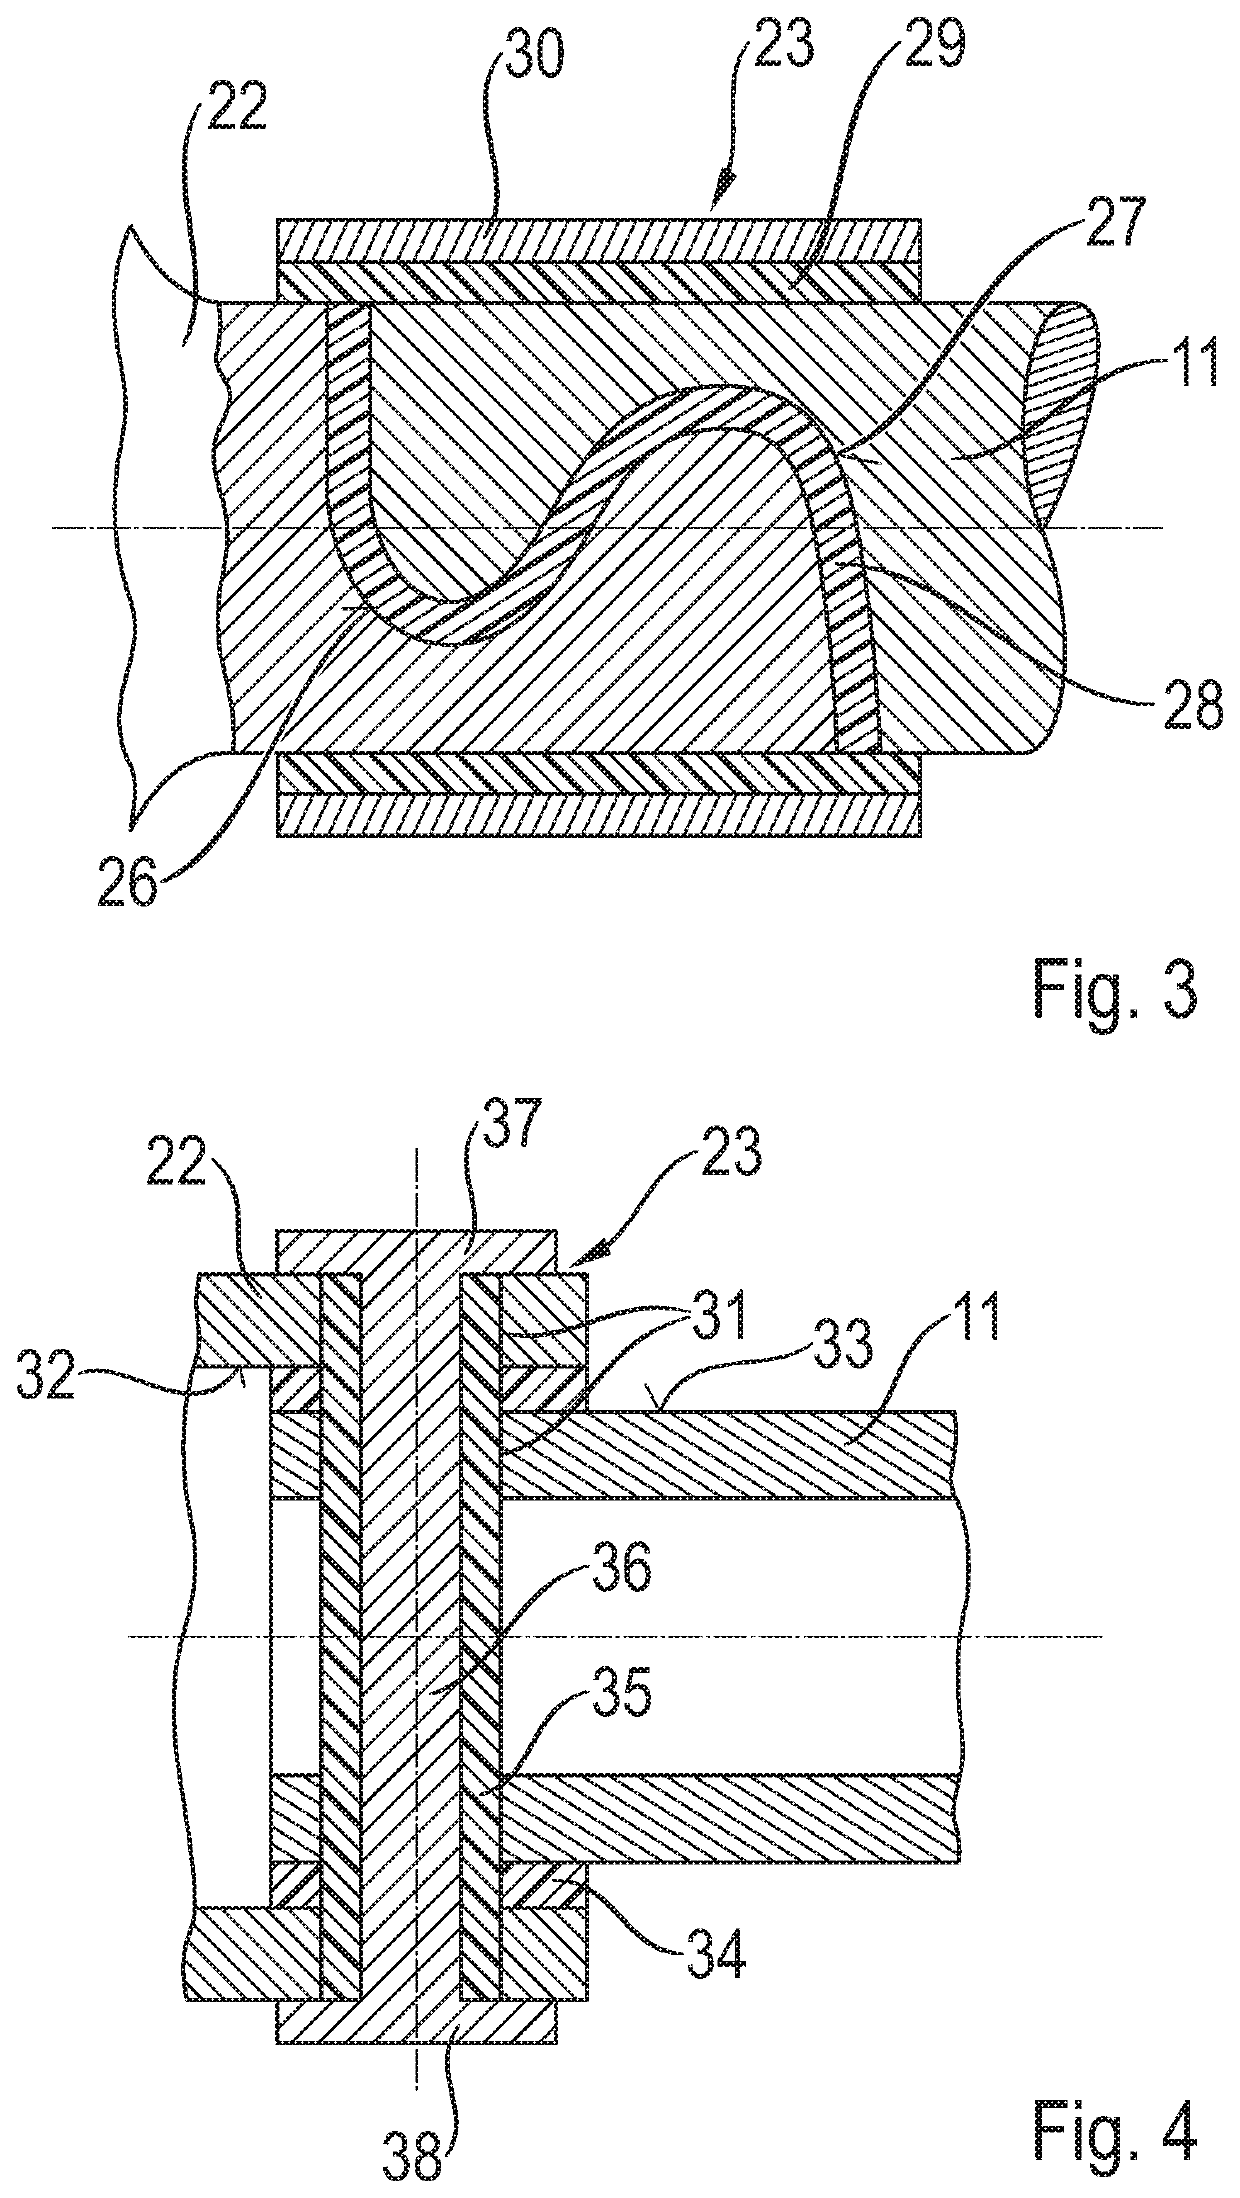 Adjustable roll stabilizer for a chassis of a motor vehicle